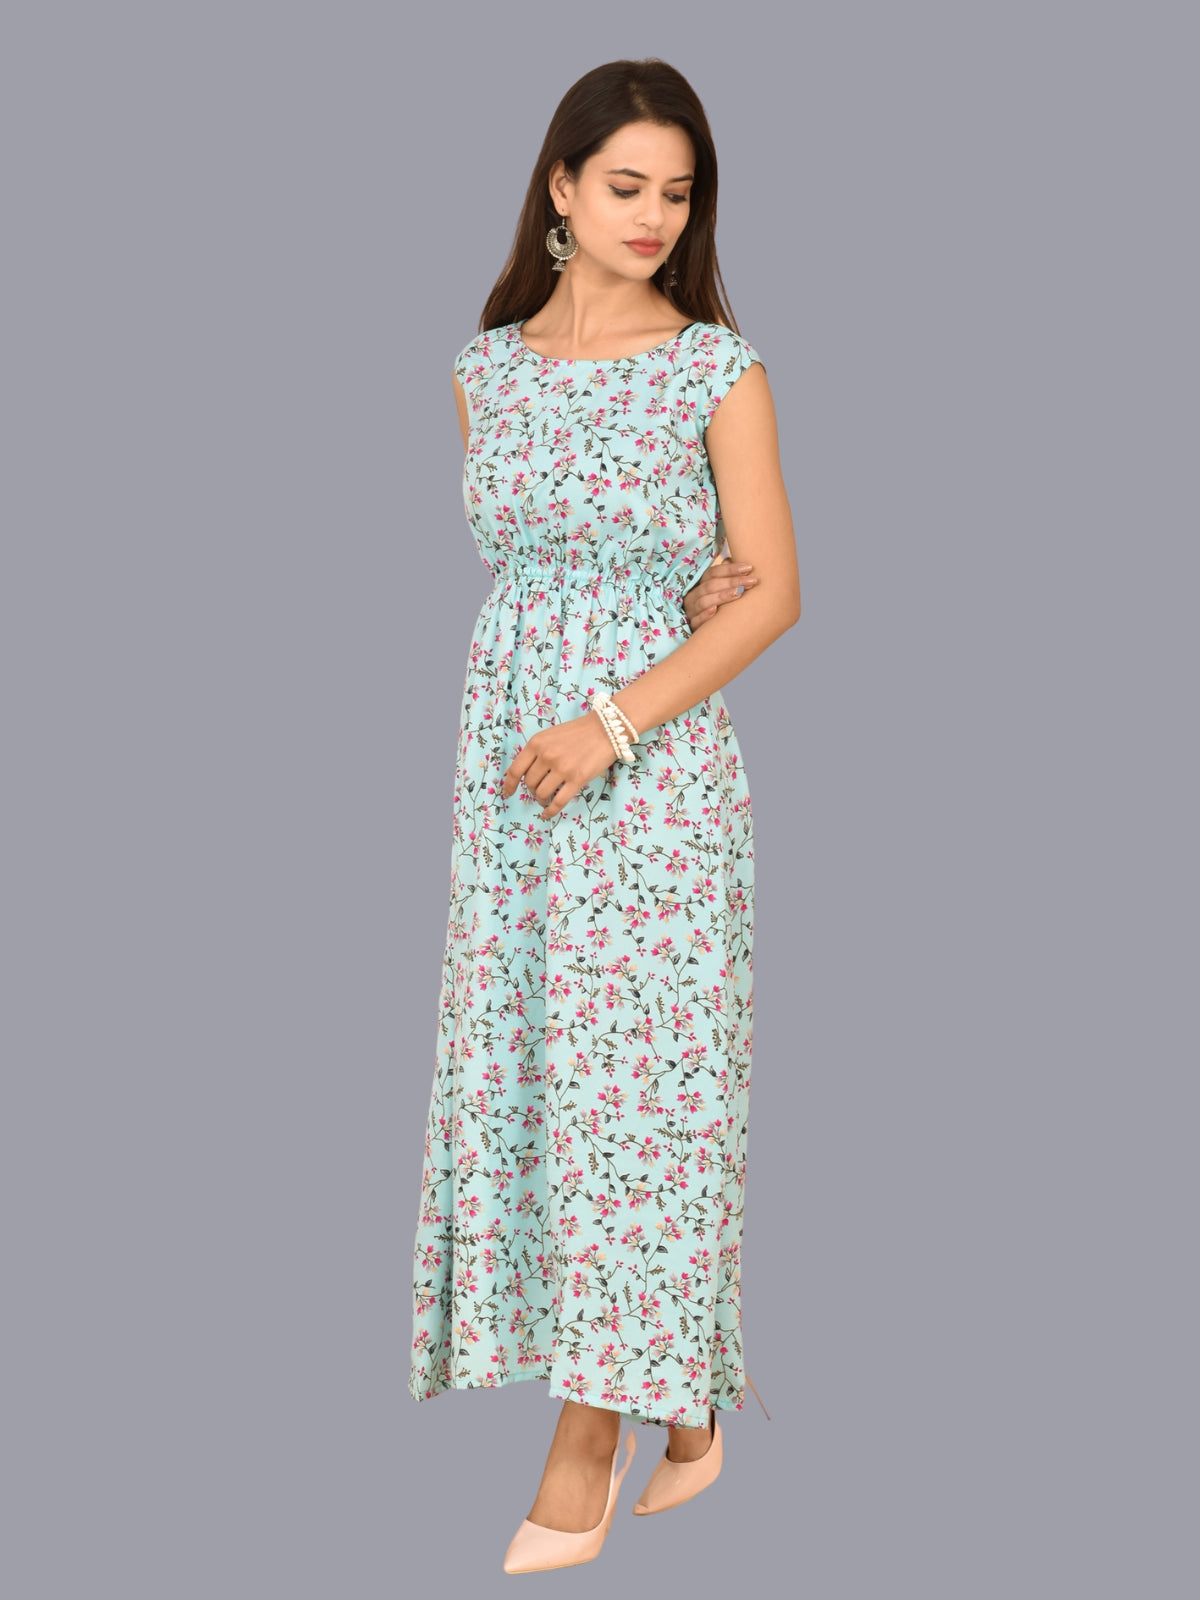 Womens Ice Blue Floral Printed Crepe Fabric Maxi Dress